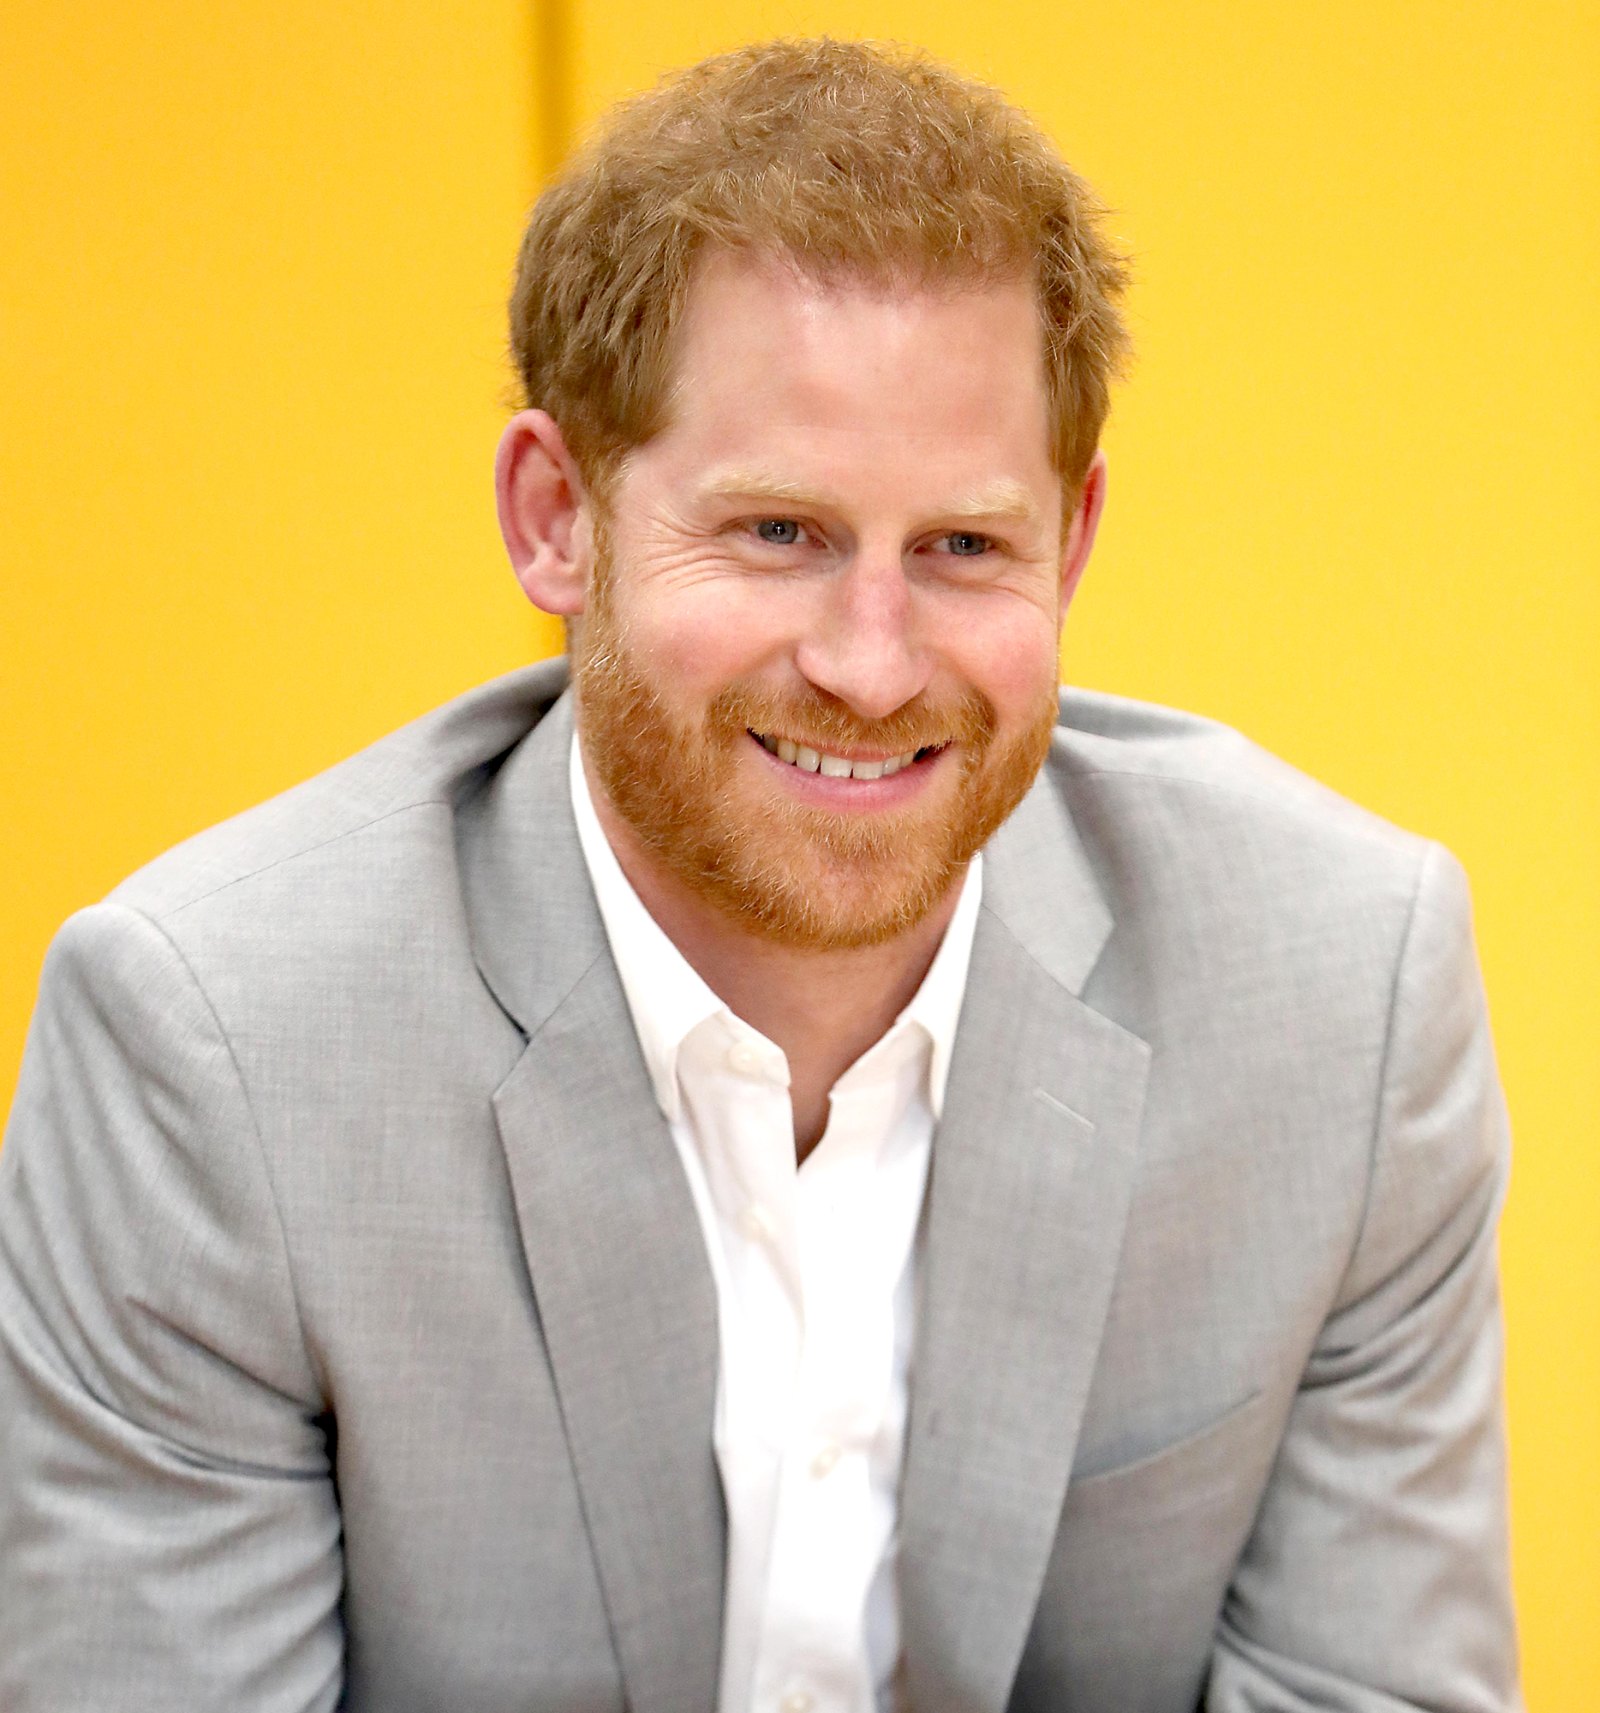 Prince Harry Cancels Trip Amid Rumors Royal Baby Arrived